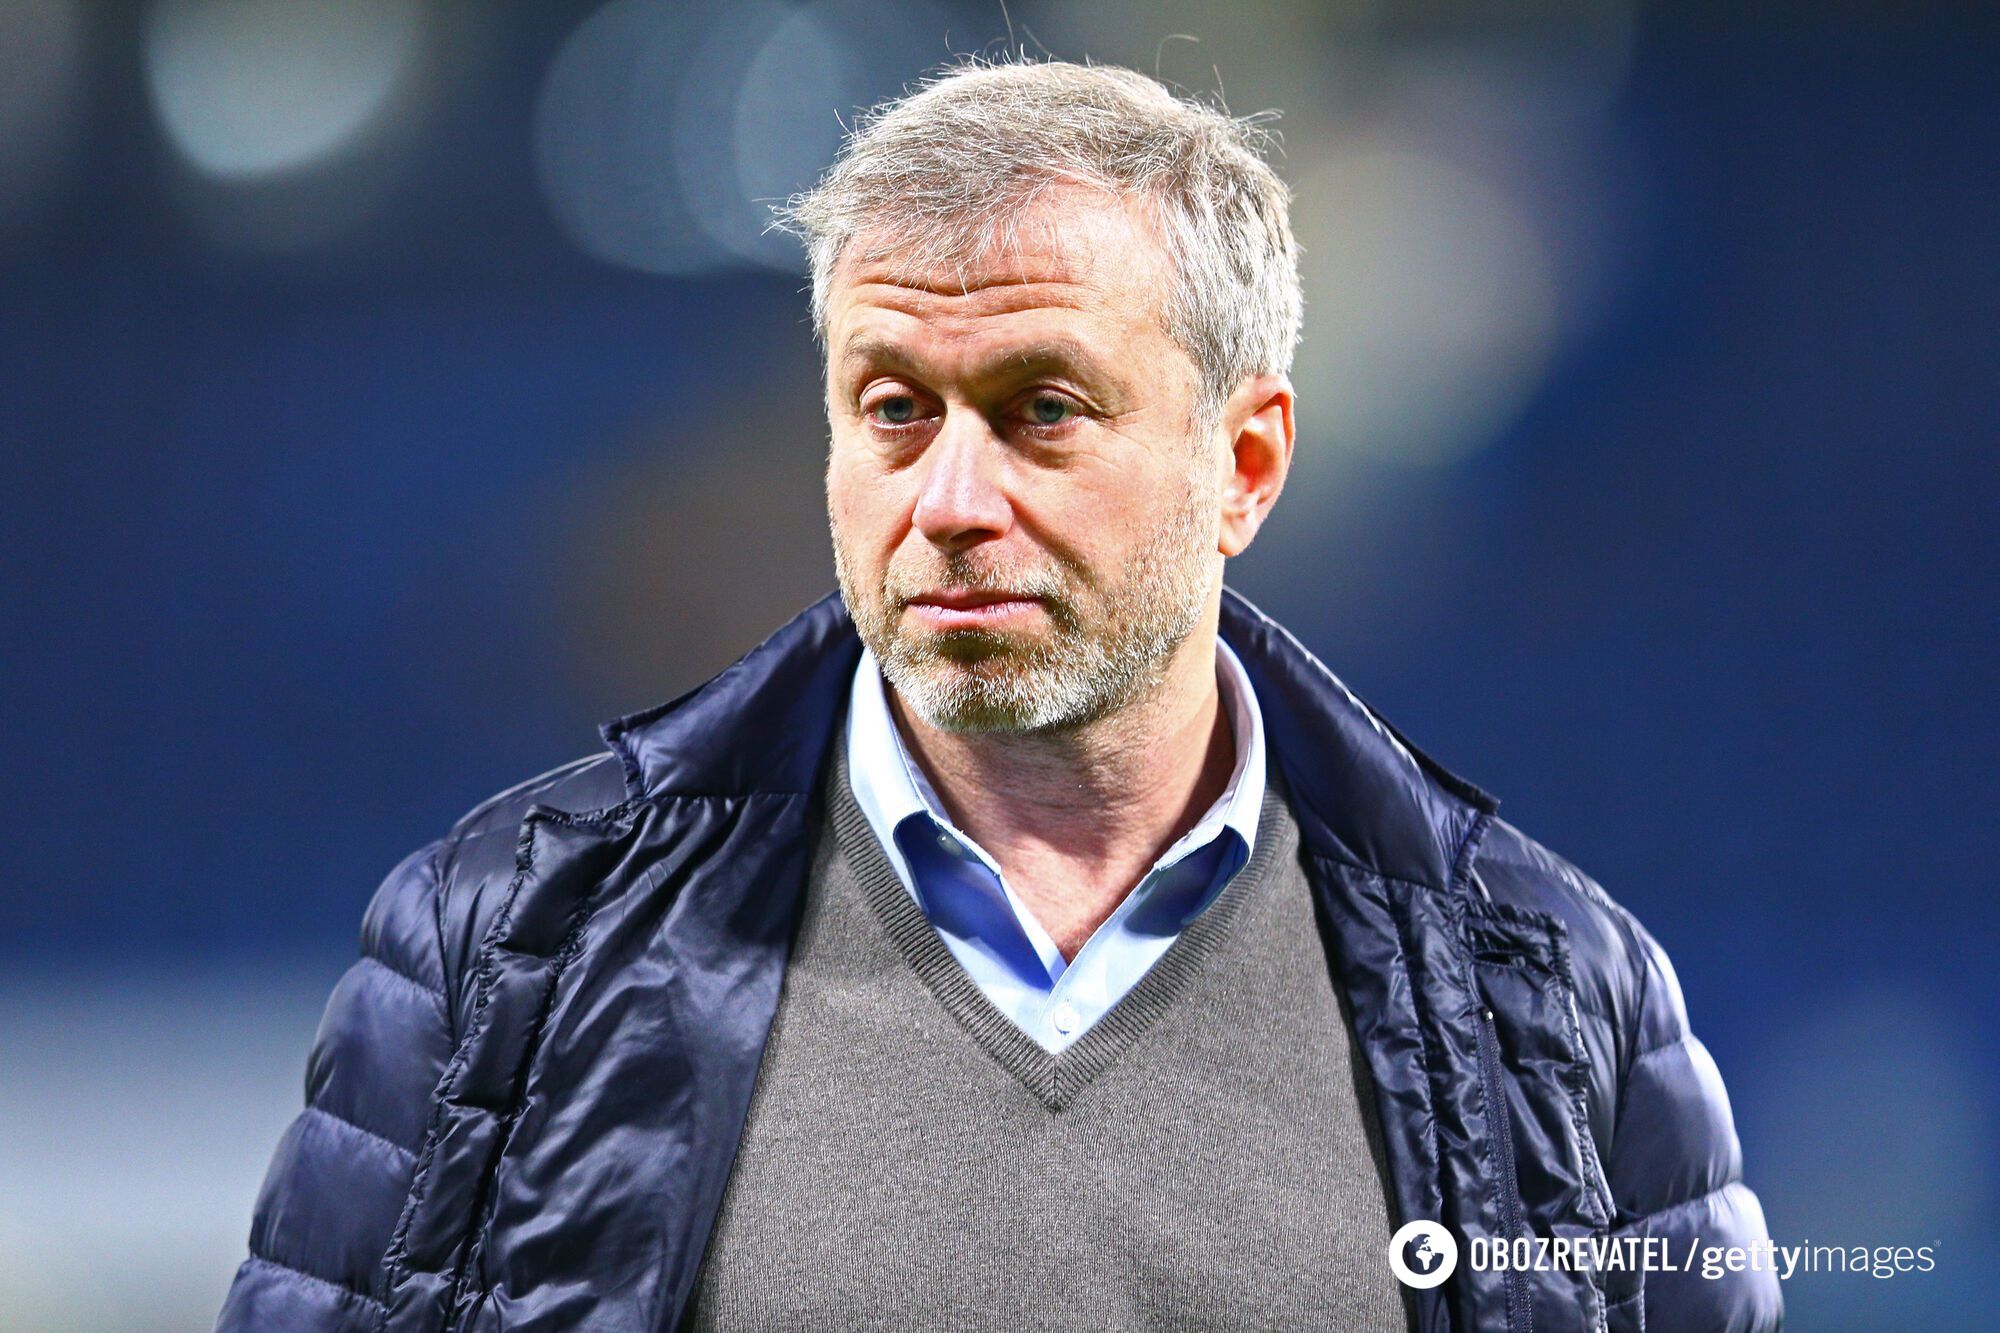 Media reveal that Abramovich proposed British goverment to send money received after selling Chelsea to Israel instead of Ukraine